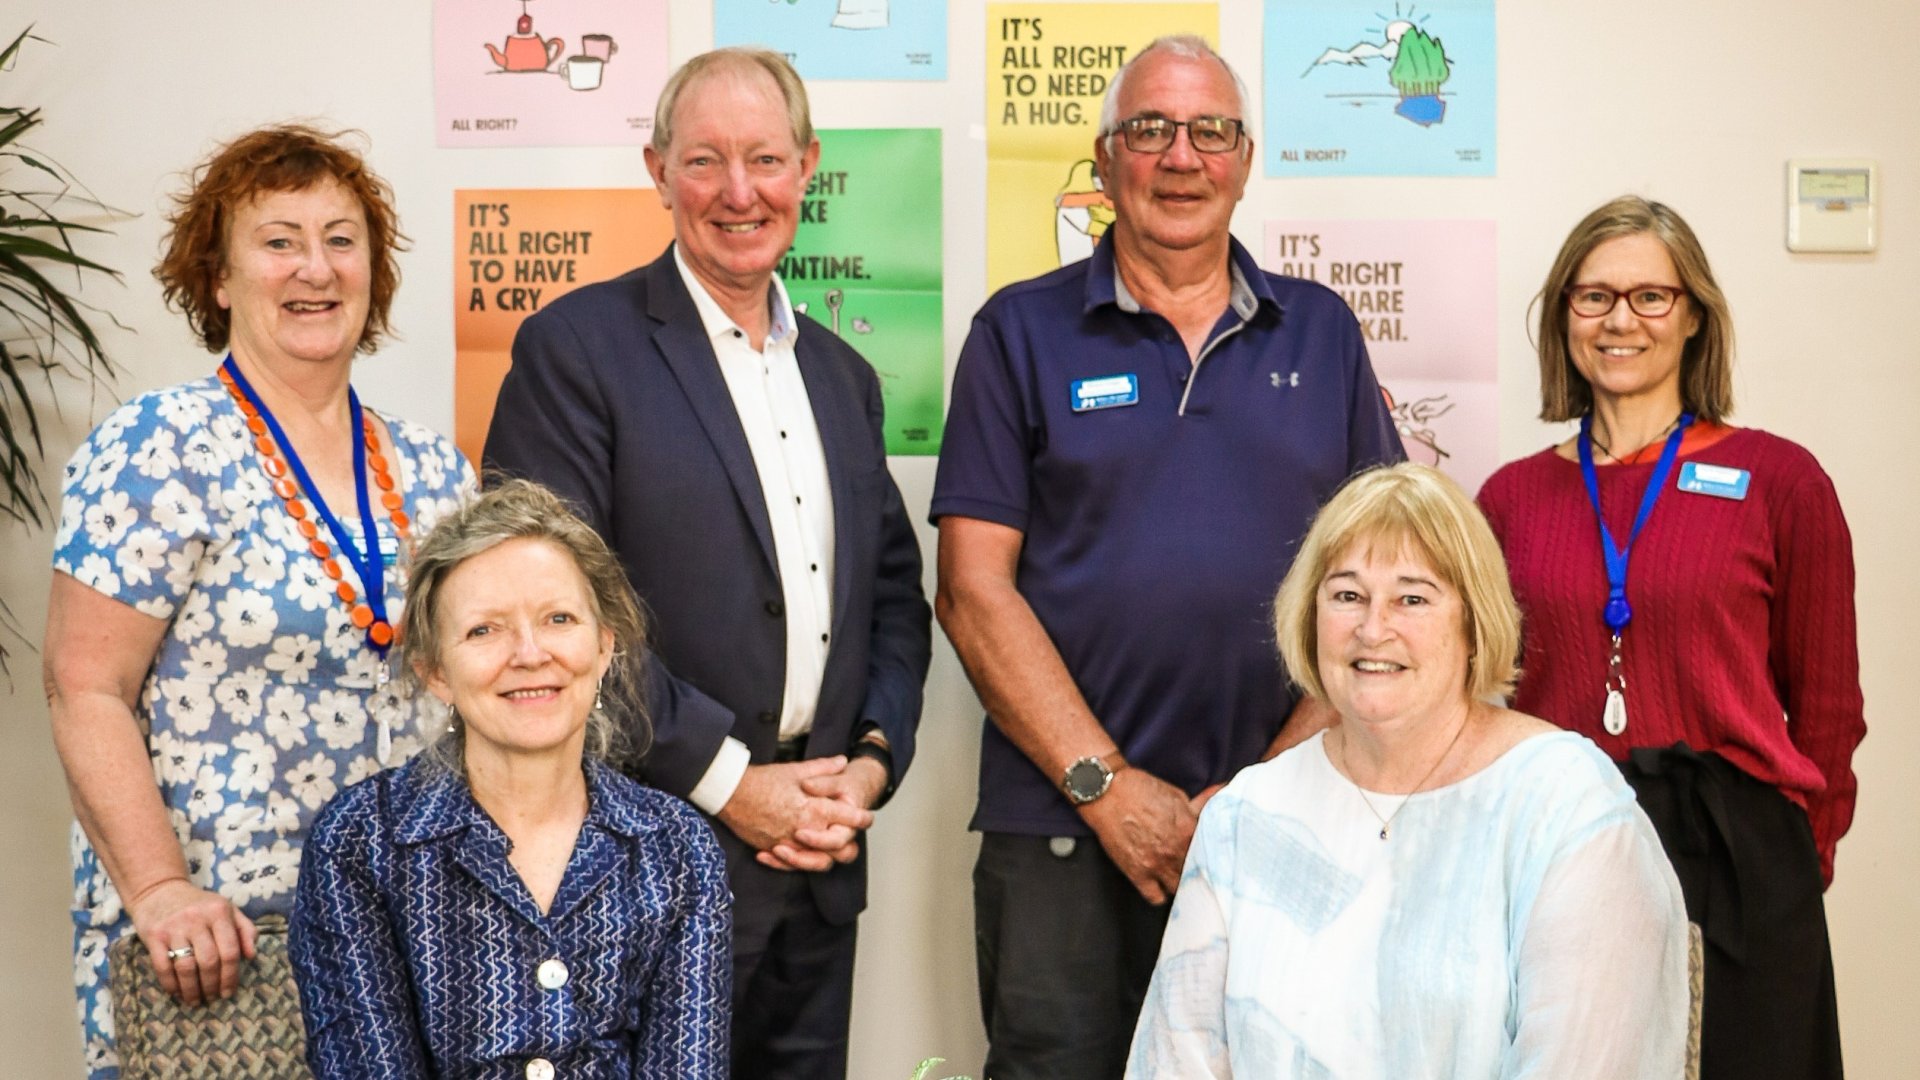 Mayor Nick Smith with the Recovery Navigators. Back, from left: Annie Leather, Nick Smith, Winton Griggs and Fiona Ingram. Seated are Navigator Coordinator Katie Sellars (left) and Anna Gully.